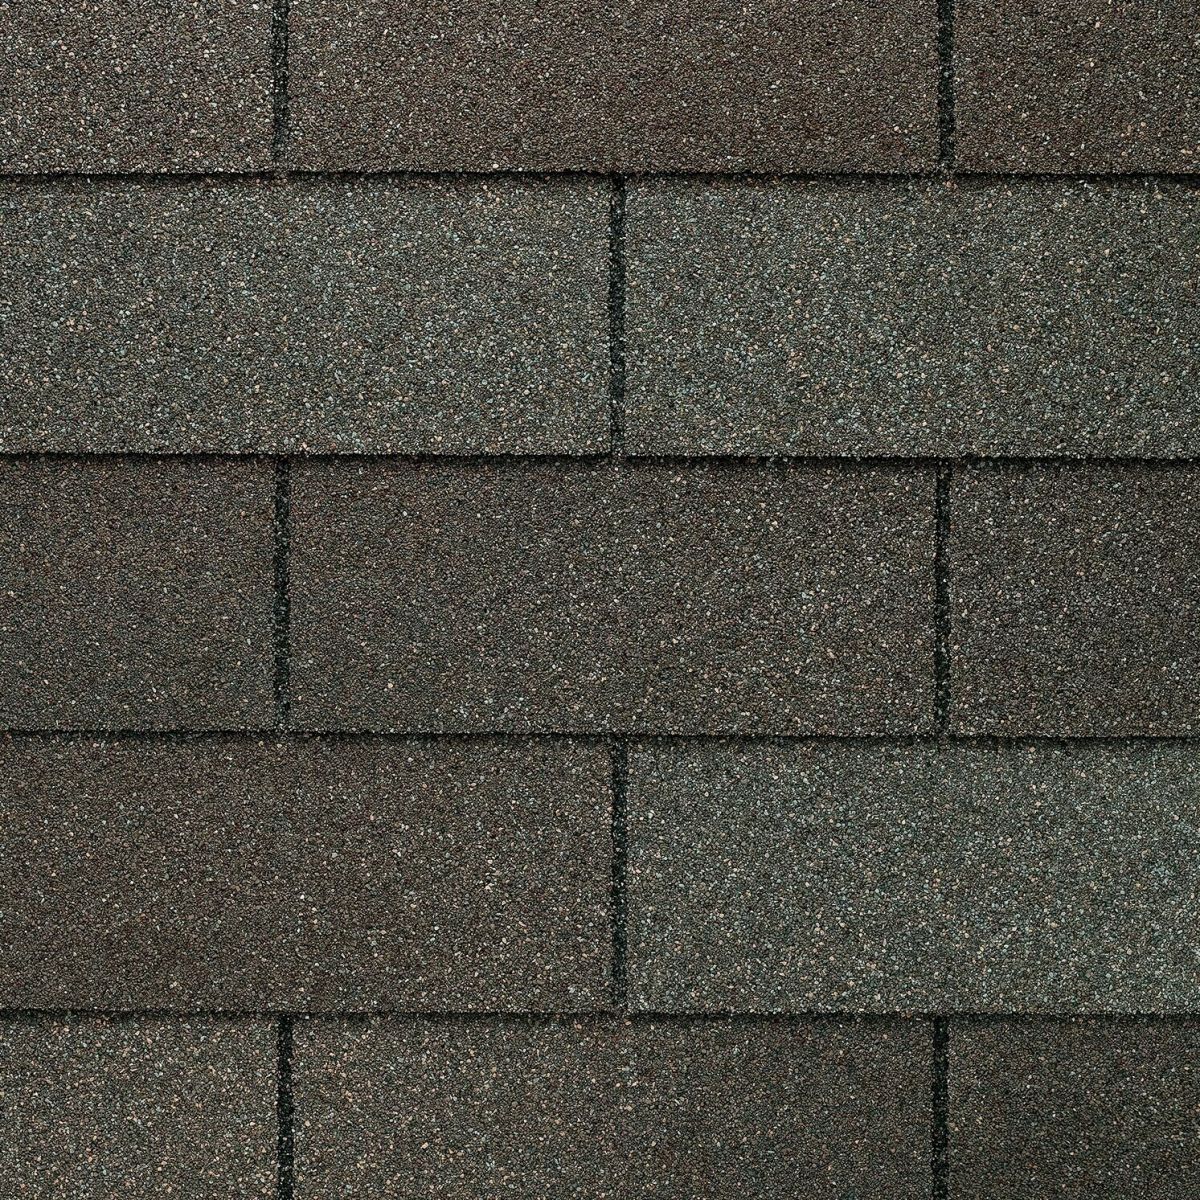 Campbell's Precision Roofing Images